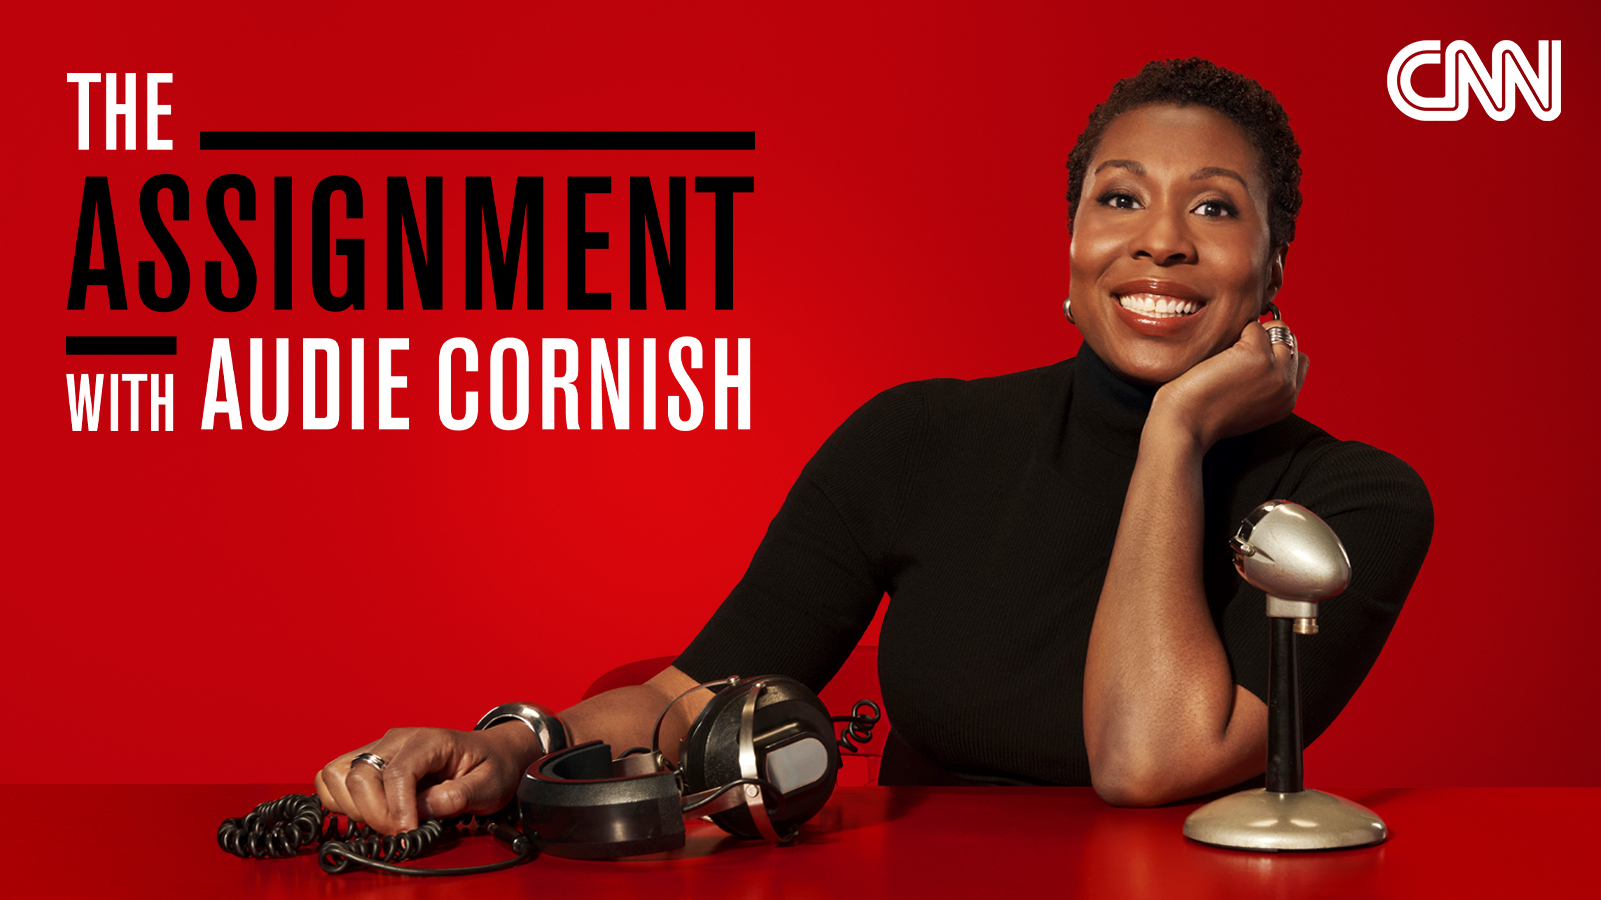 Cnns New Podcast “the Assignment With Audie Cornish” Cnn International Commercial 